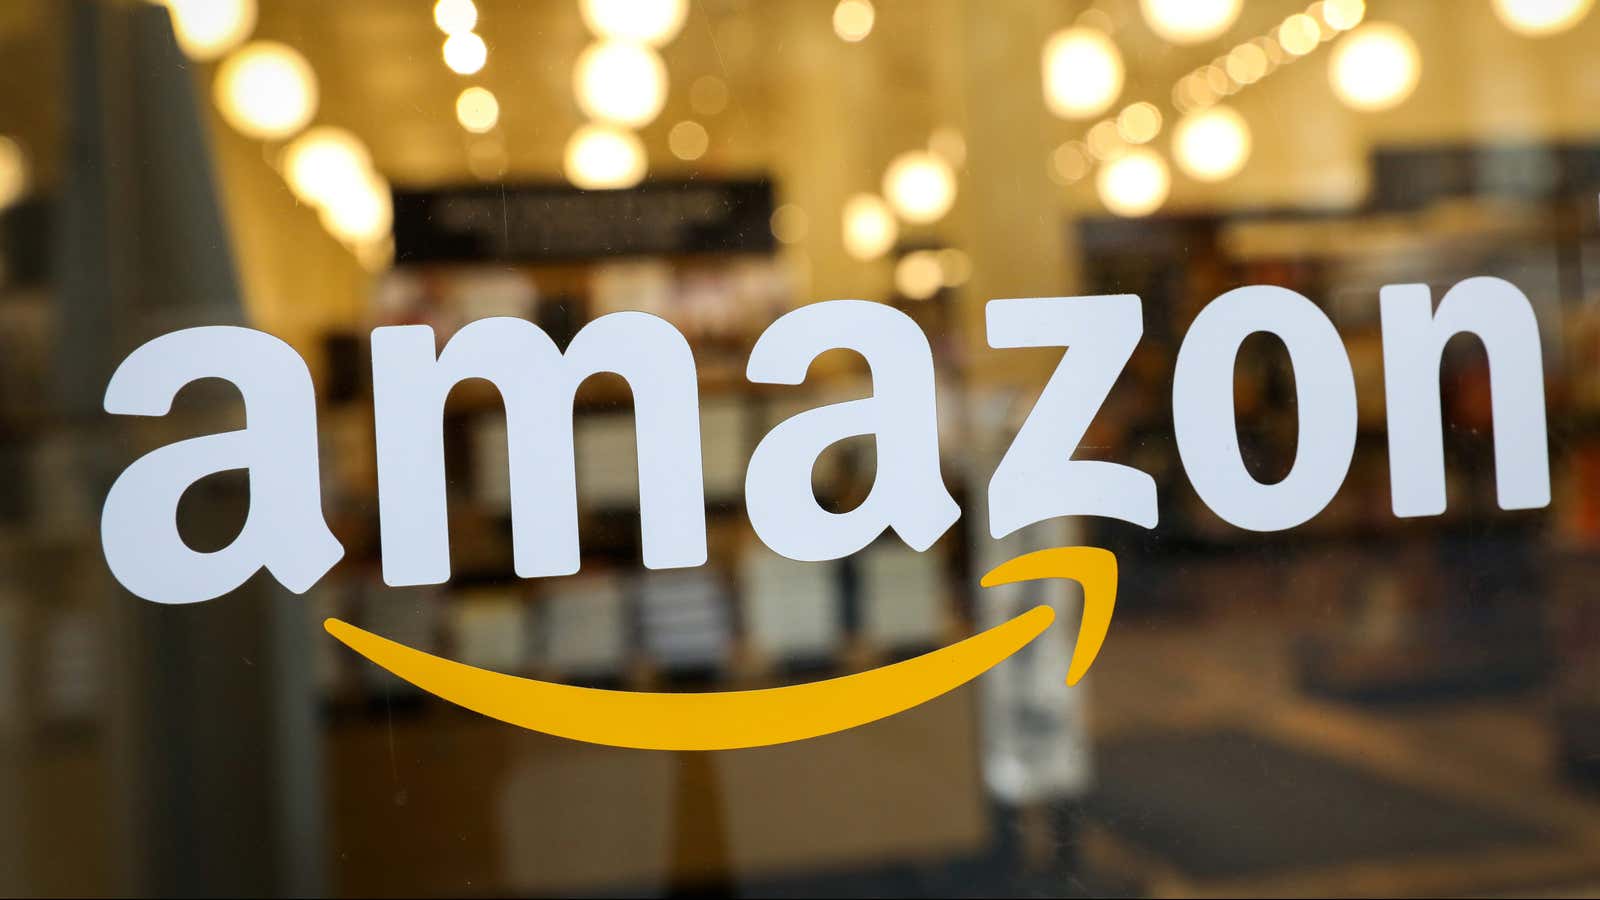 FILE PHOTO: The logo of Amazon is seen on the door of an Amazon Books retail store in New York City, U.S., February 14, 2019.â€¦